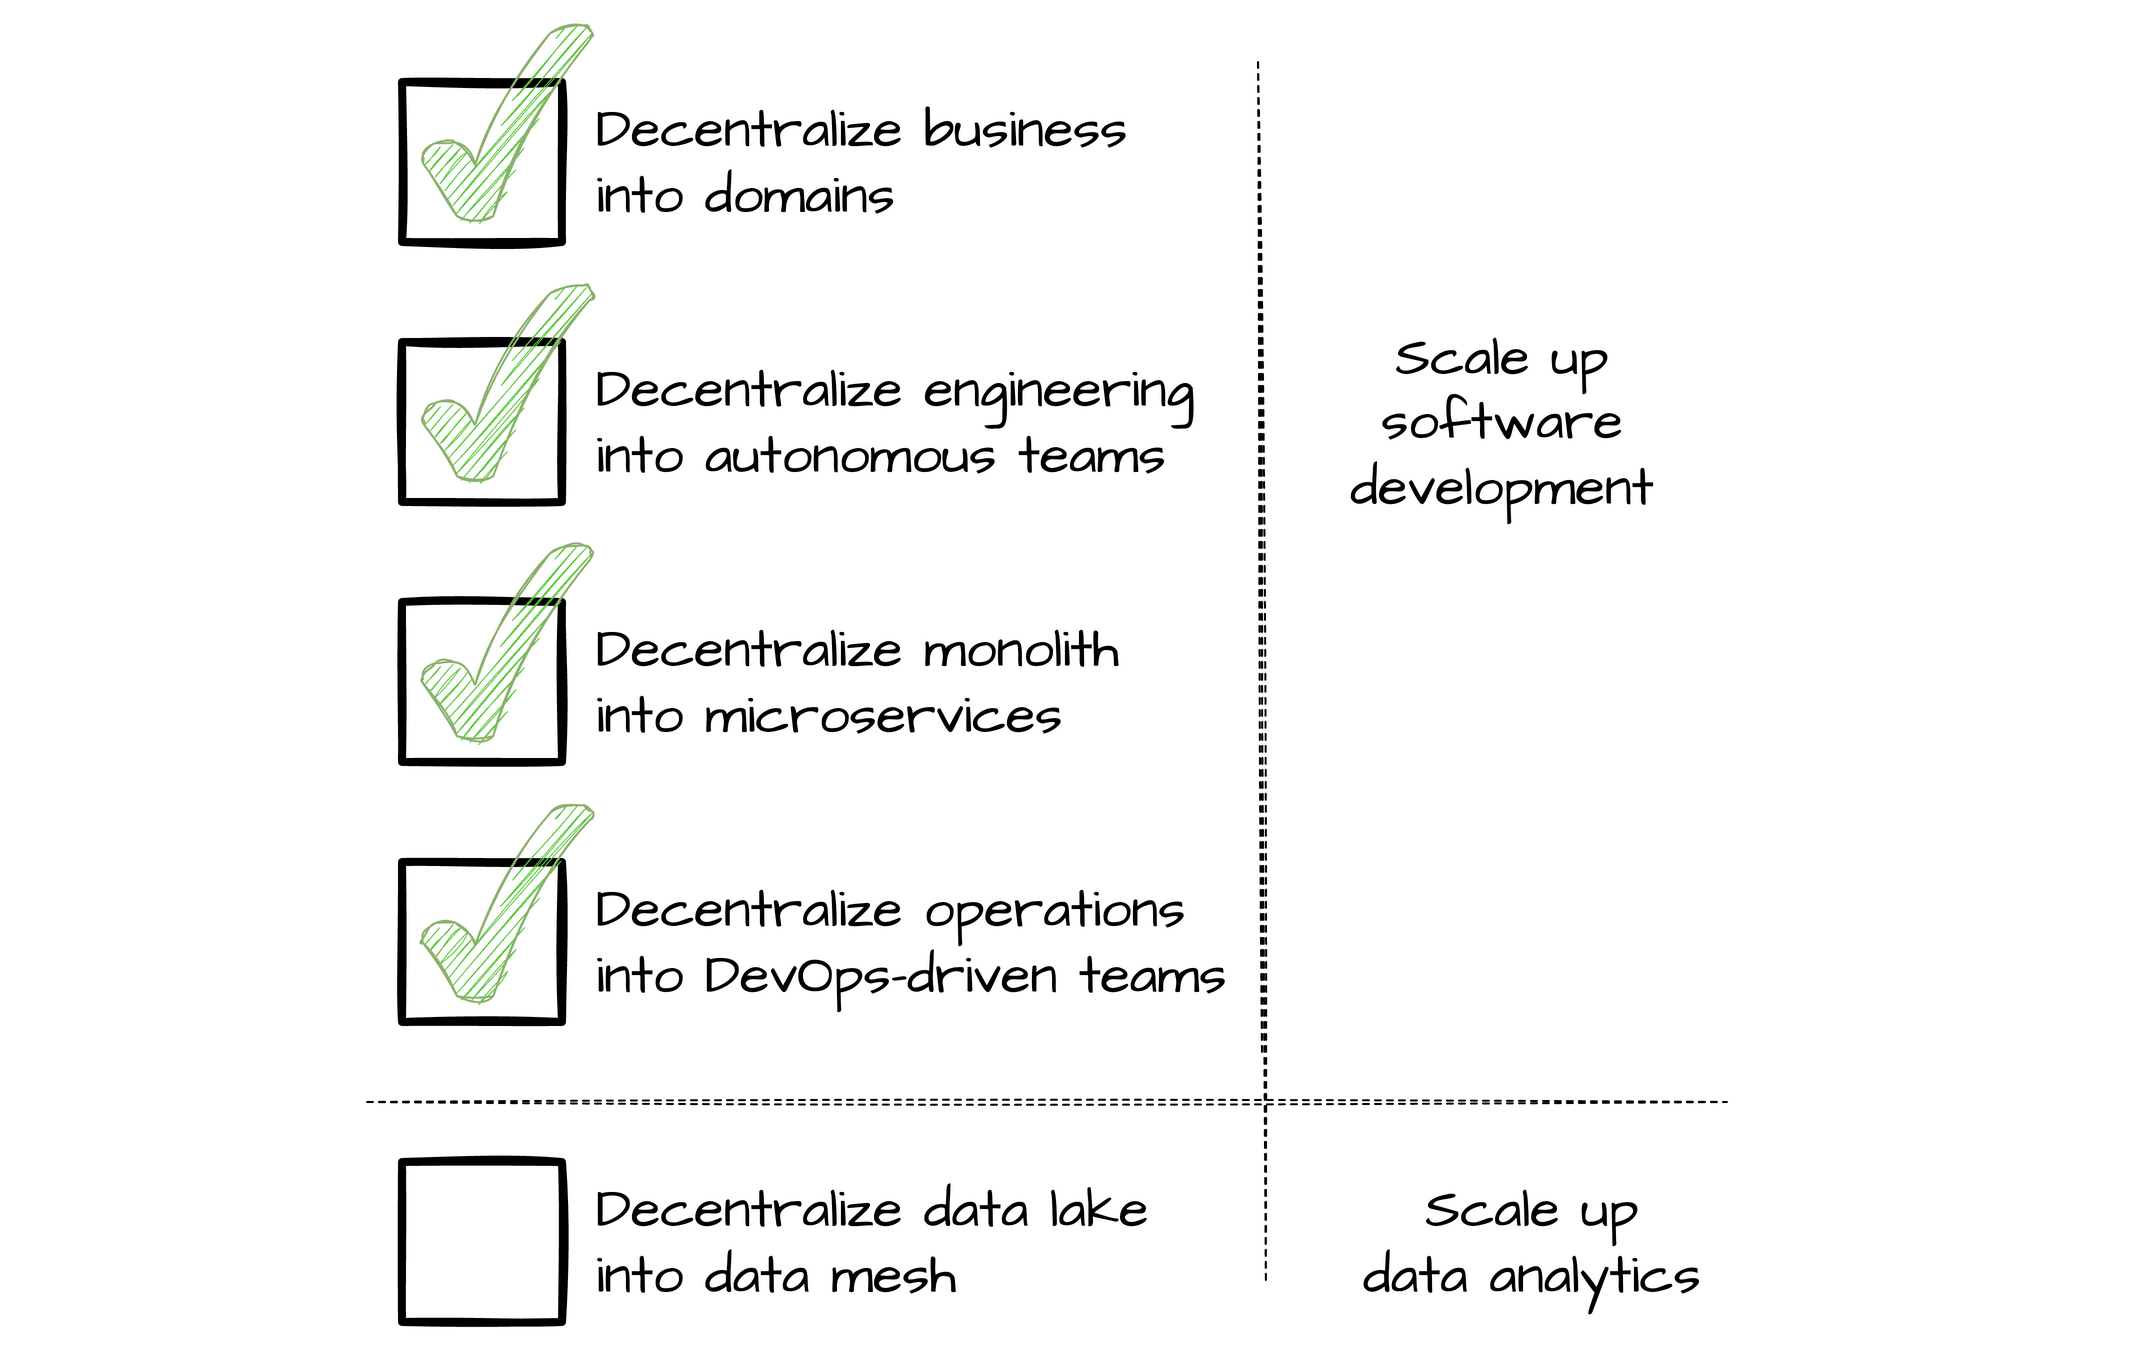 You already scaled up your software development by: 1. Decentralize business into domains; 2. Decentralize engineering into autonomous teams; 3. Decentralize monolith into microservices; 4. Decentralize operations into DevOps teams. Next step: scale up data analytics by decentralizing data lake into data mesh